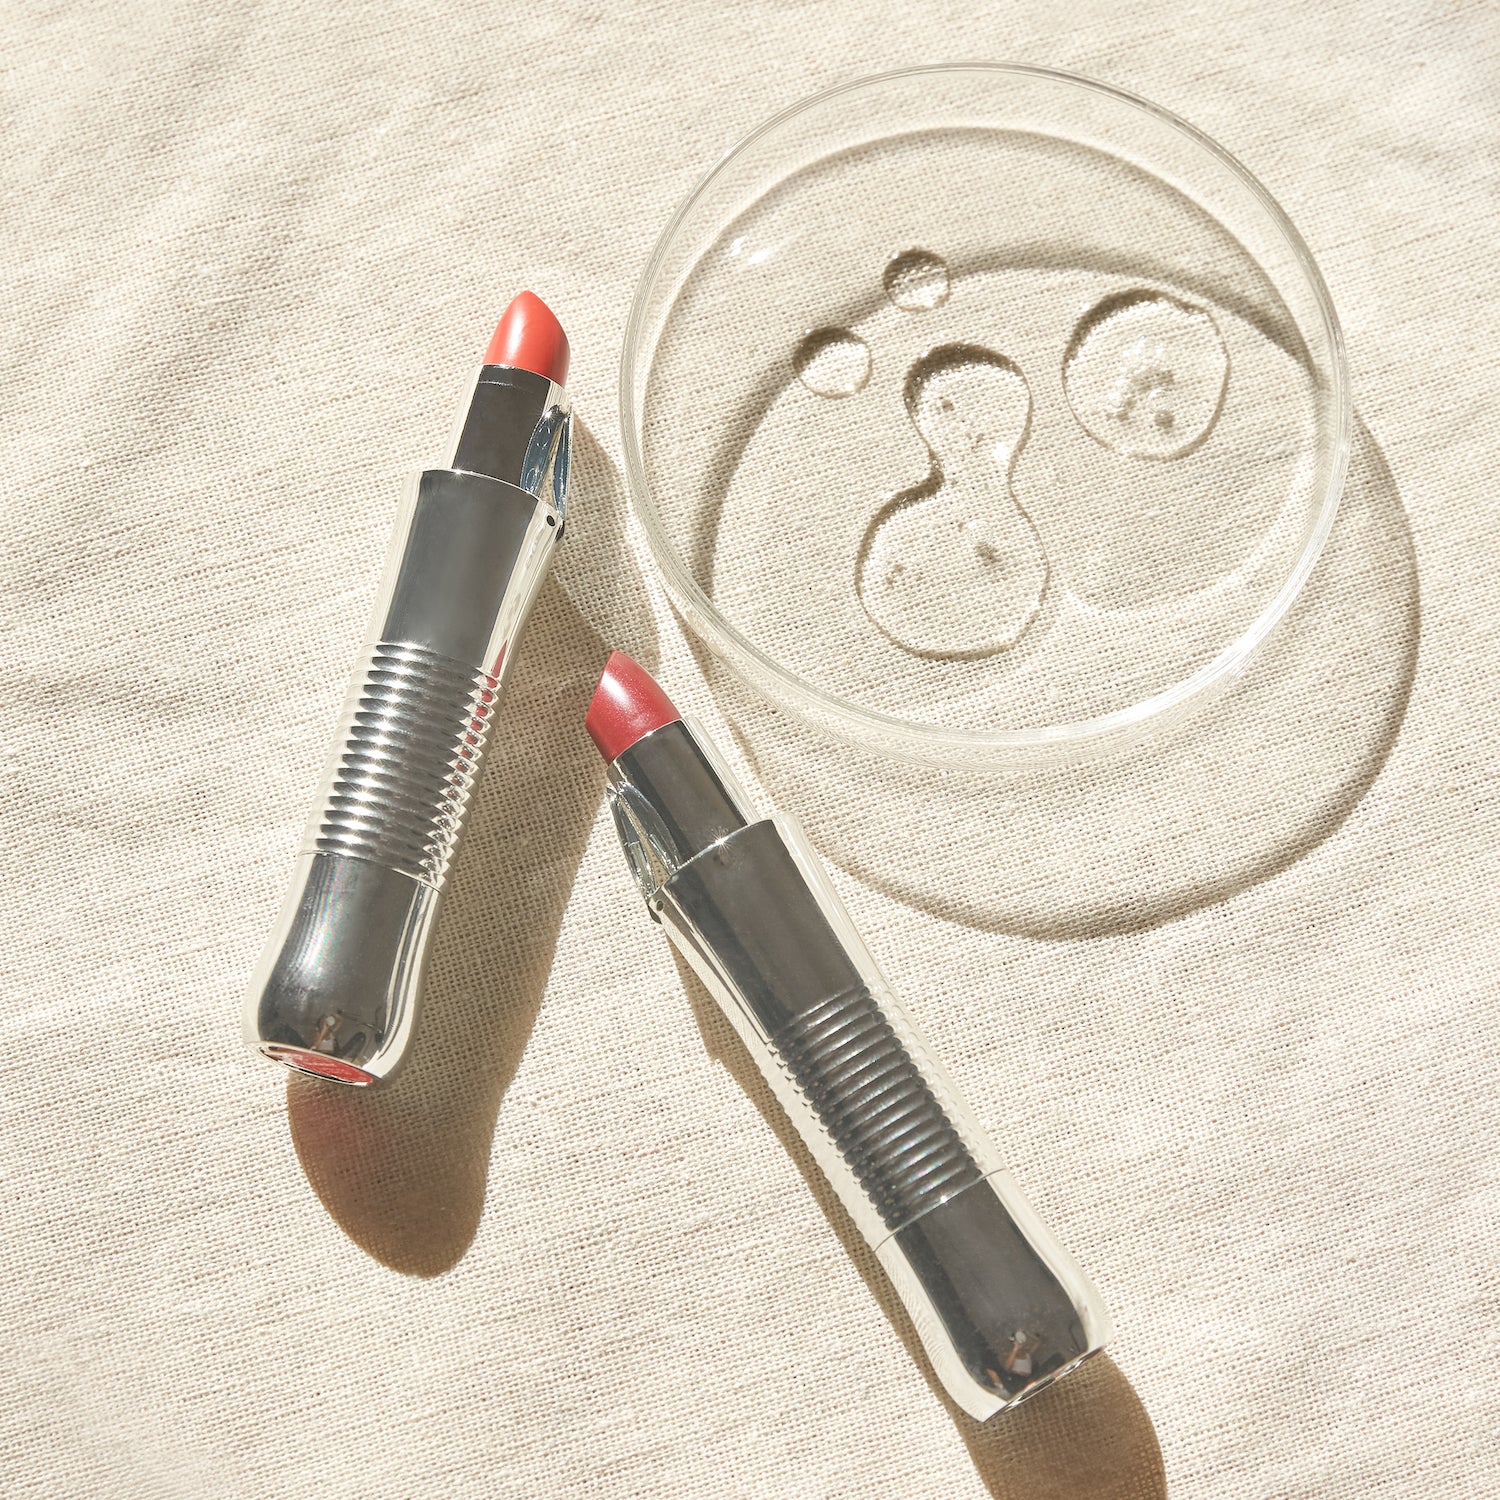 Dr. Kaplan's Lipstick formula is featured here and showcases that it also has SPF to protect your lips.